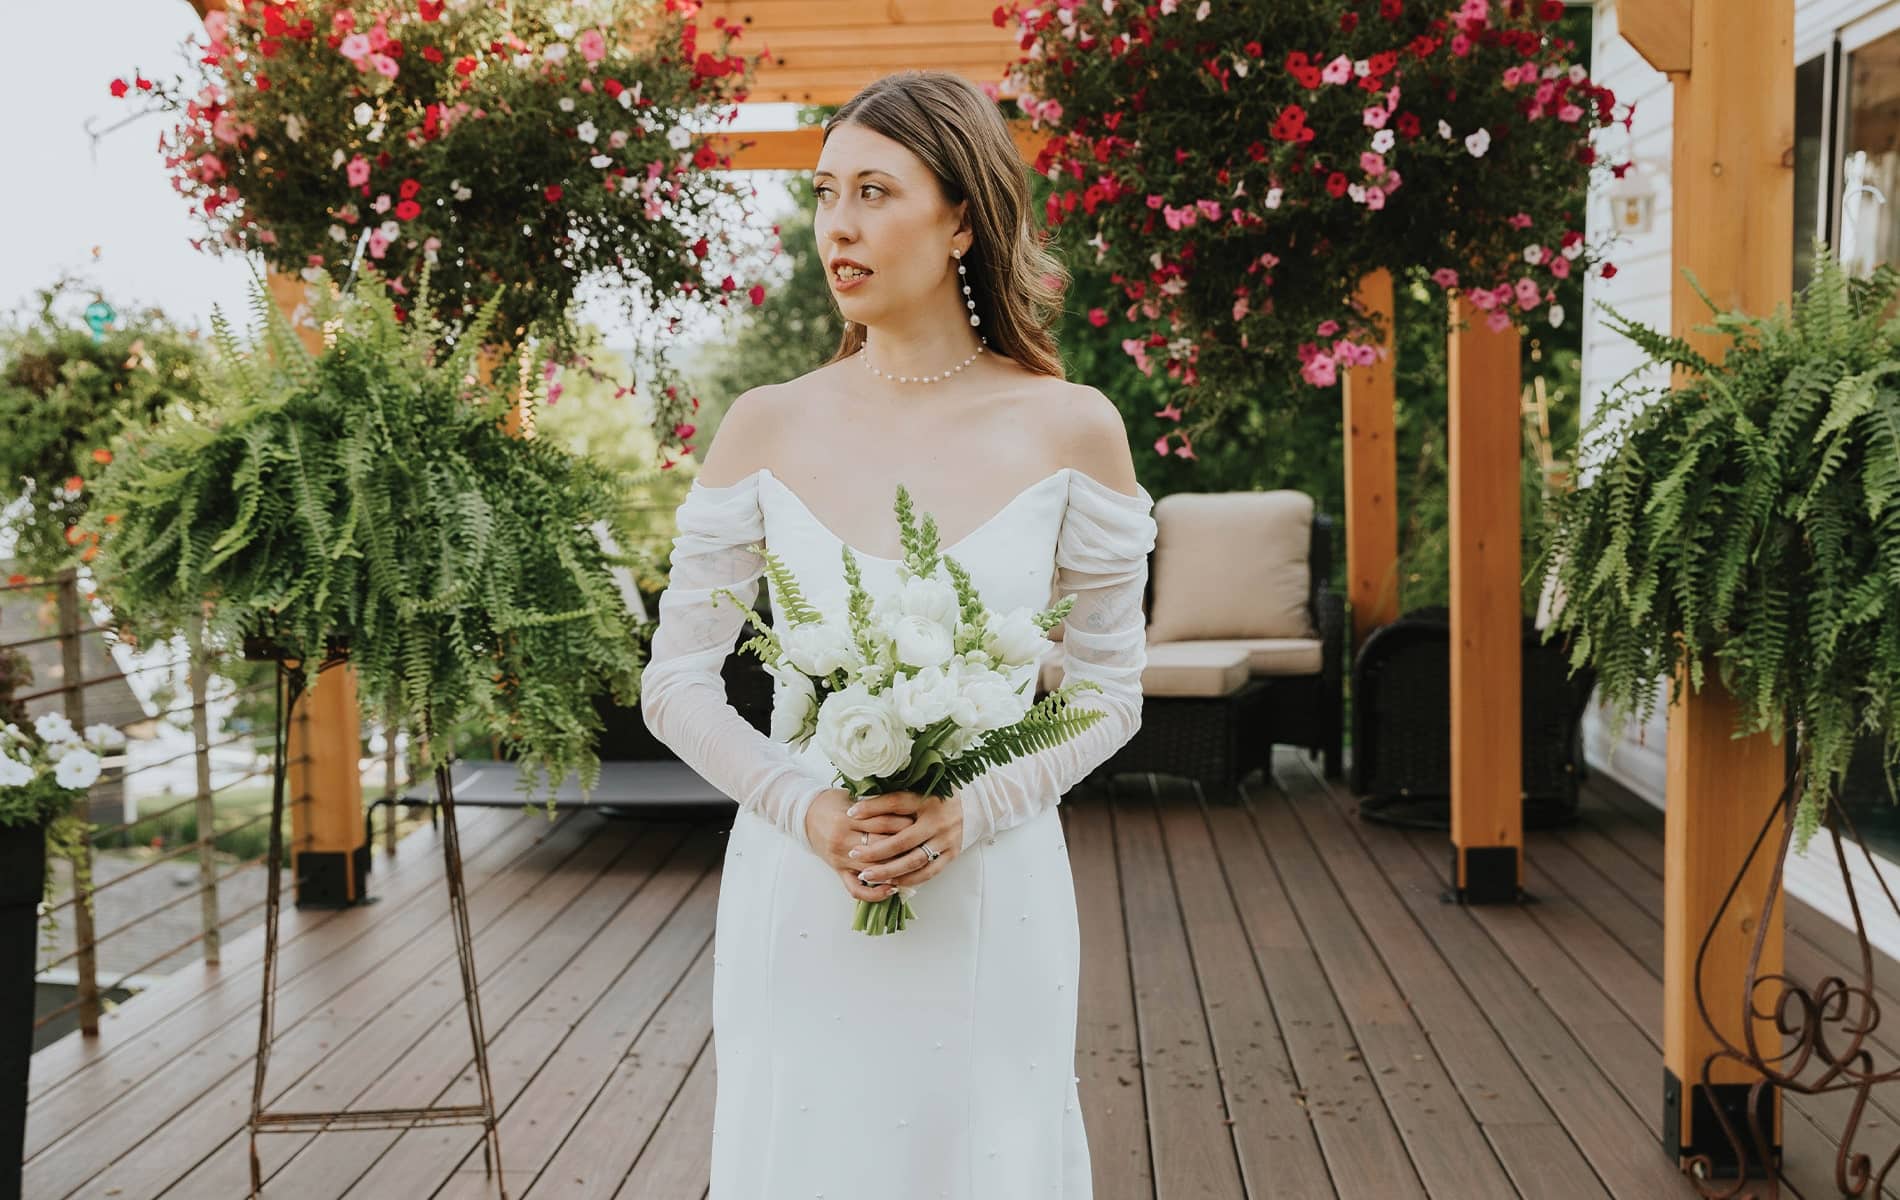 photographer Hunter Burgtorf, Ryan Thomson, Kylie Cloutier, Spring Sweet Bridal, Sarah Seven gown, Main Street Floral Shop, Enchanted Events & Party Rental